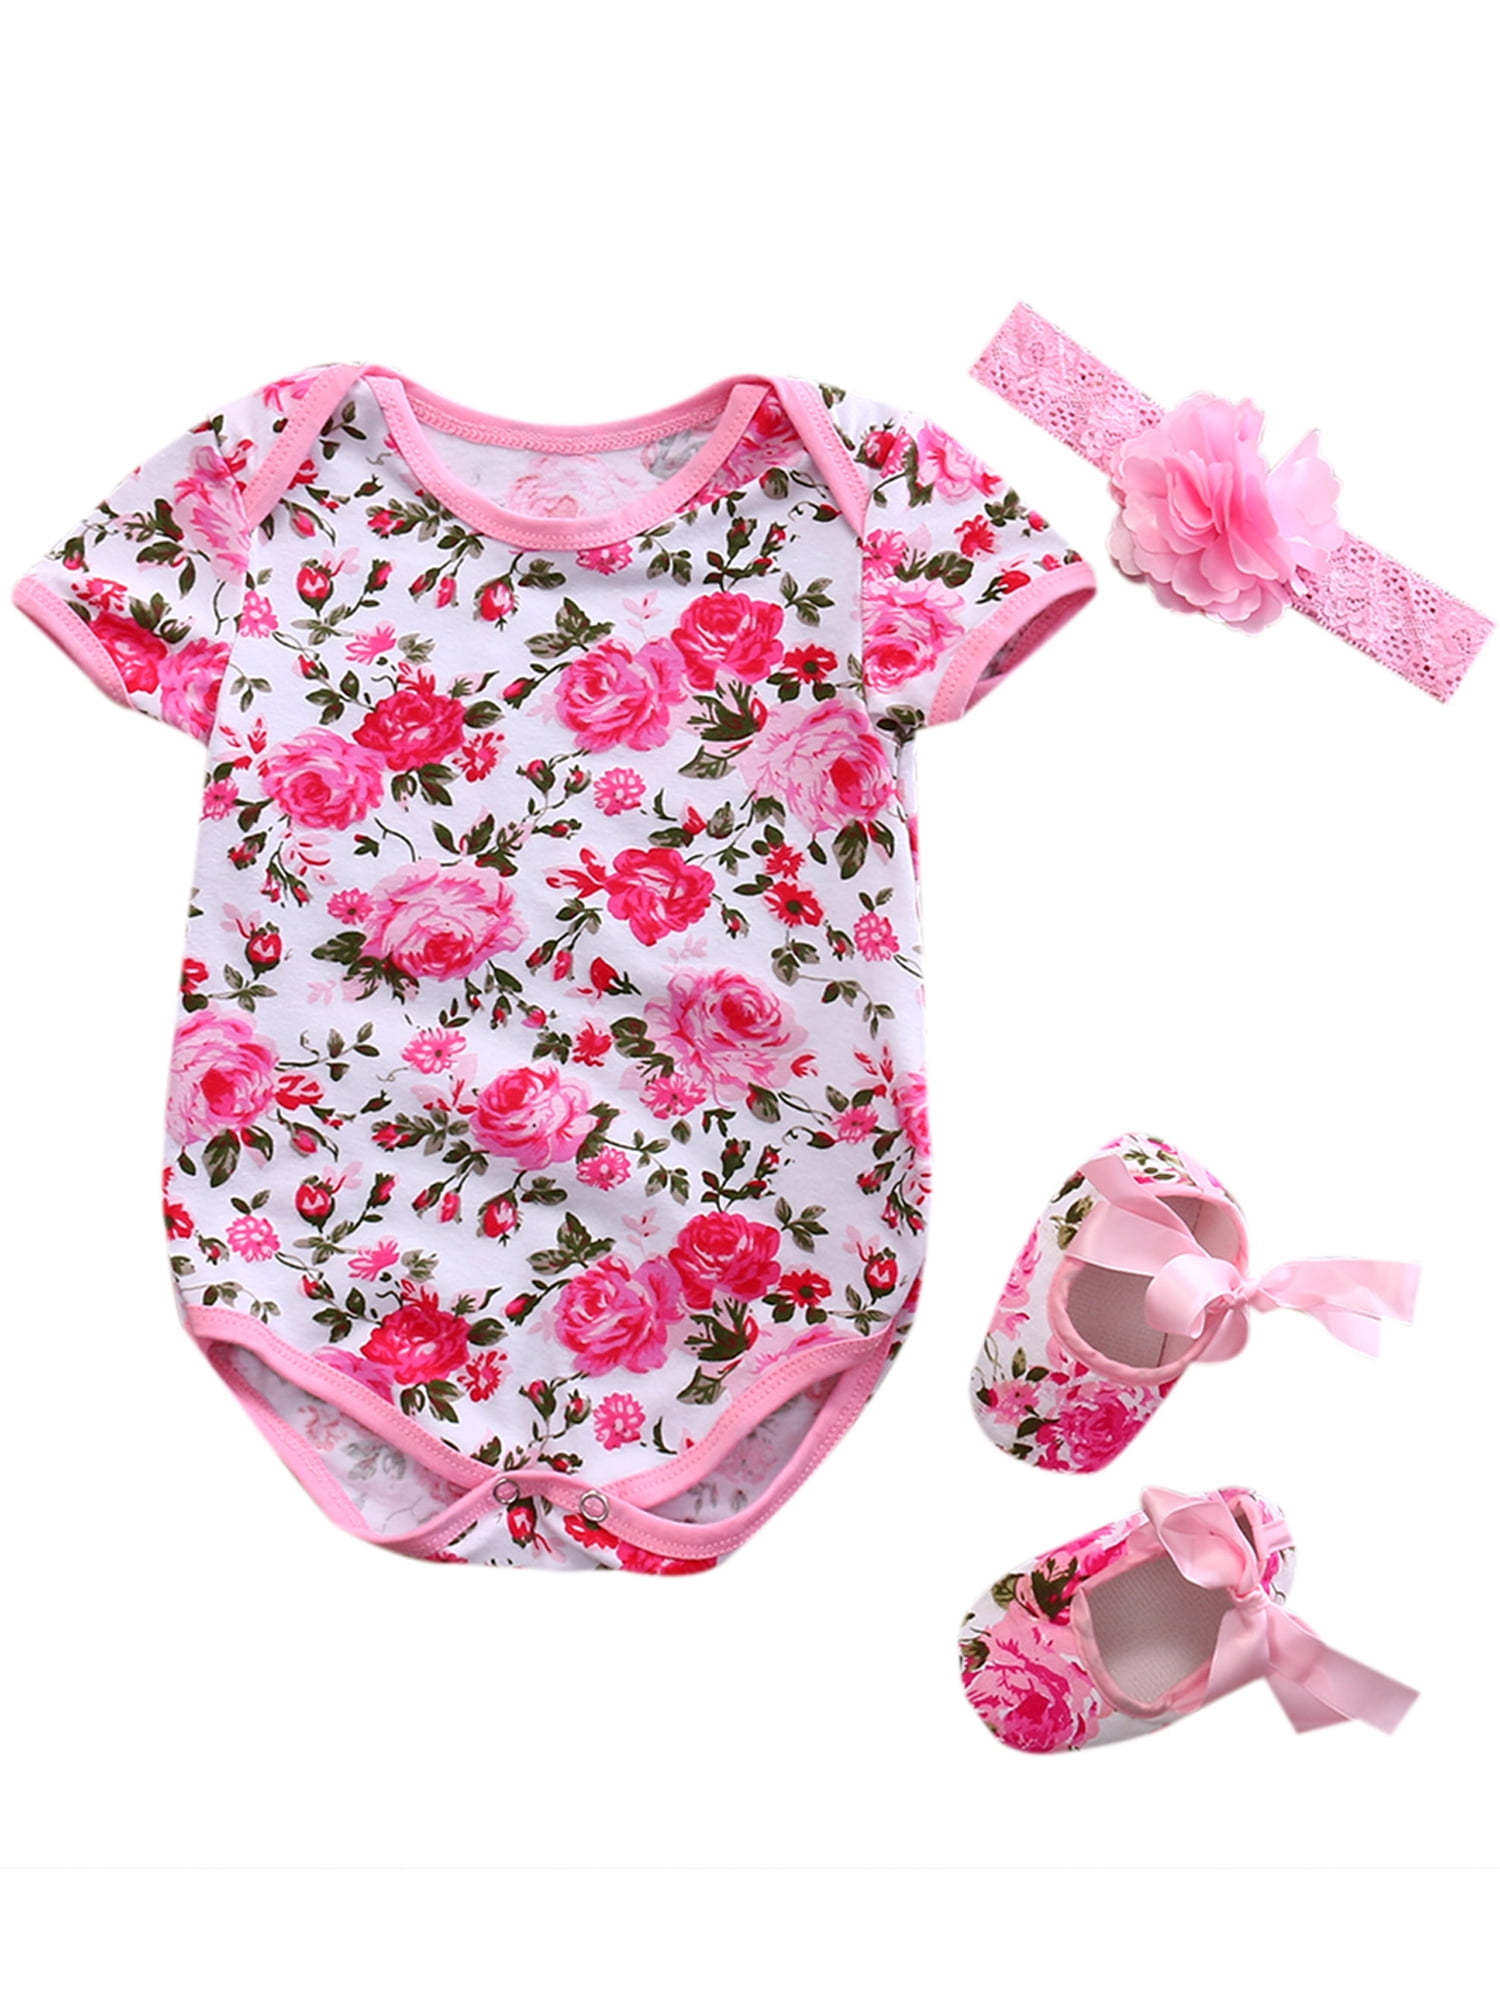 Details about   Infant Kids Baby Girls Outfits Clothes Romper Bodysuit+Floral Printed Shorts Set 